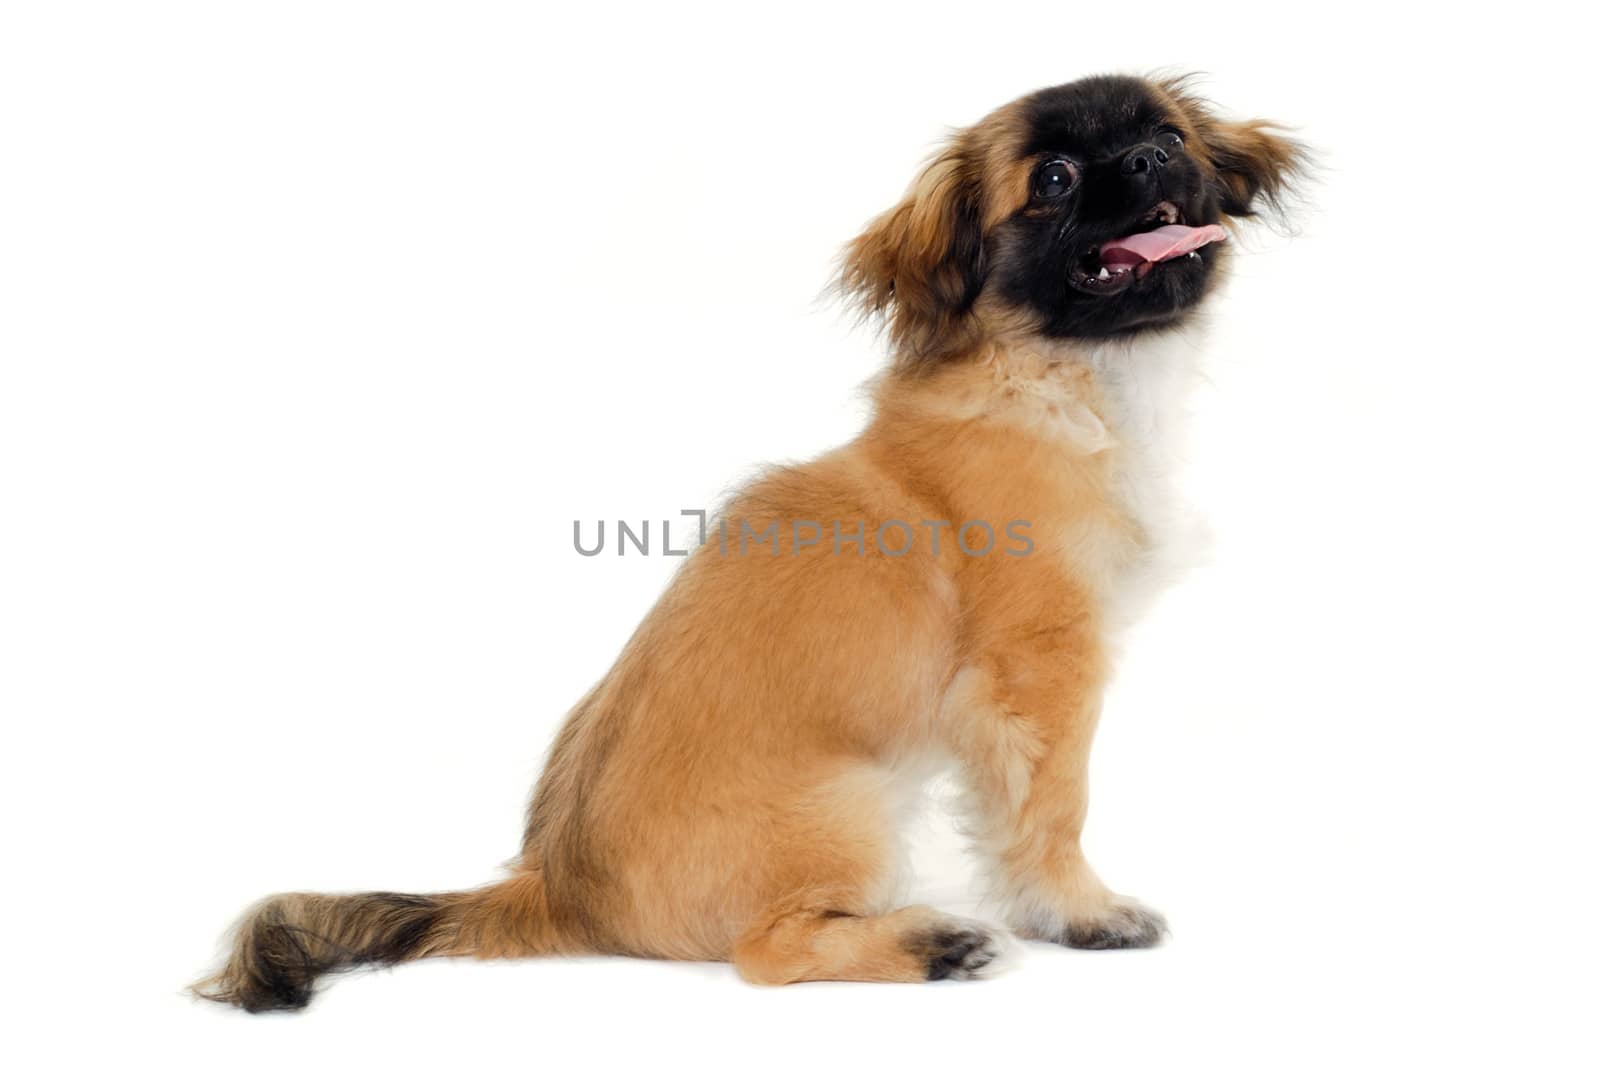 A sweet and happy puppy dog is sitting and resting on a white background